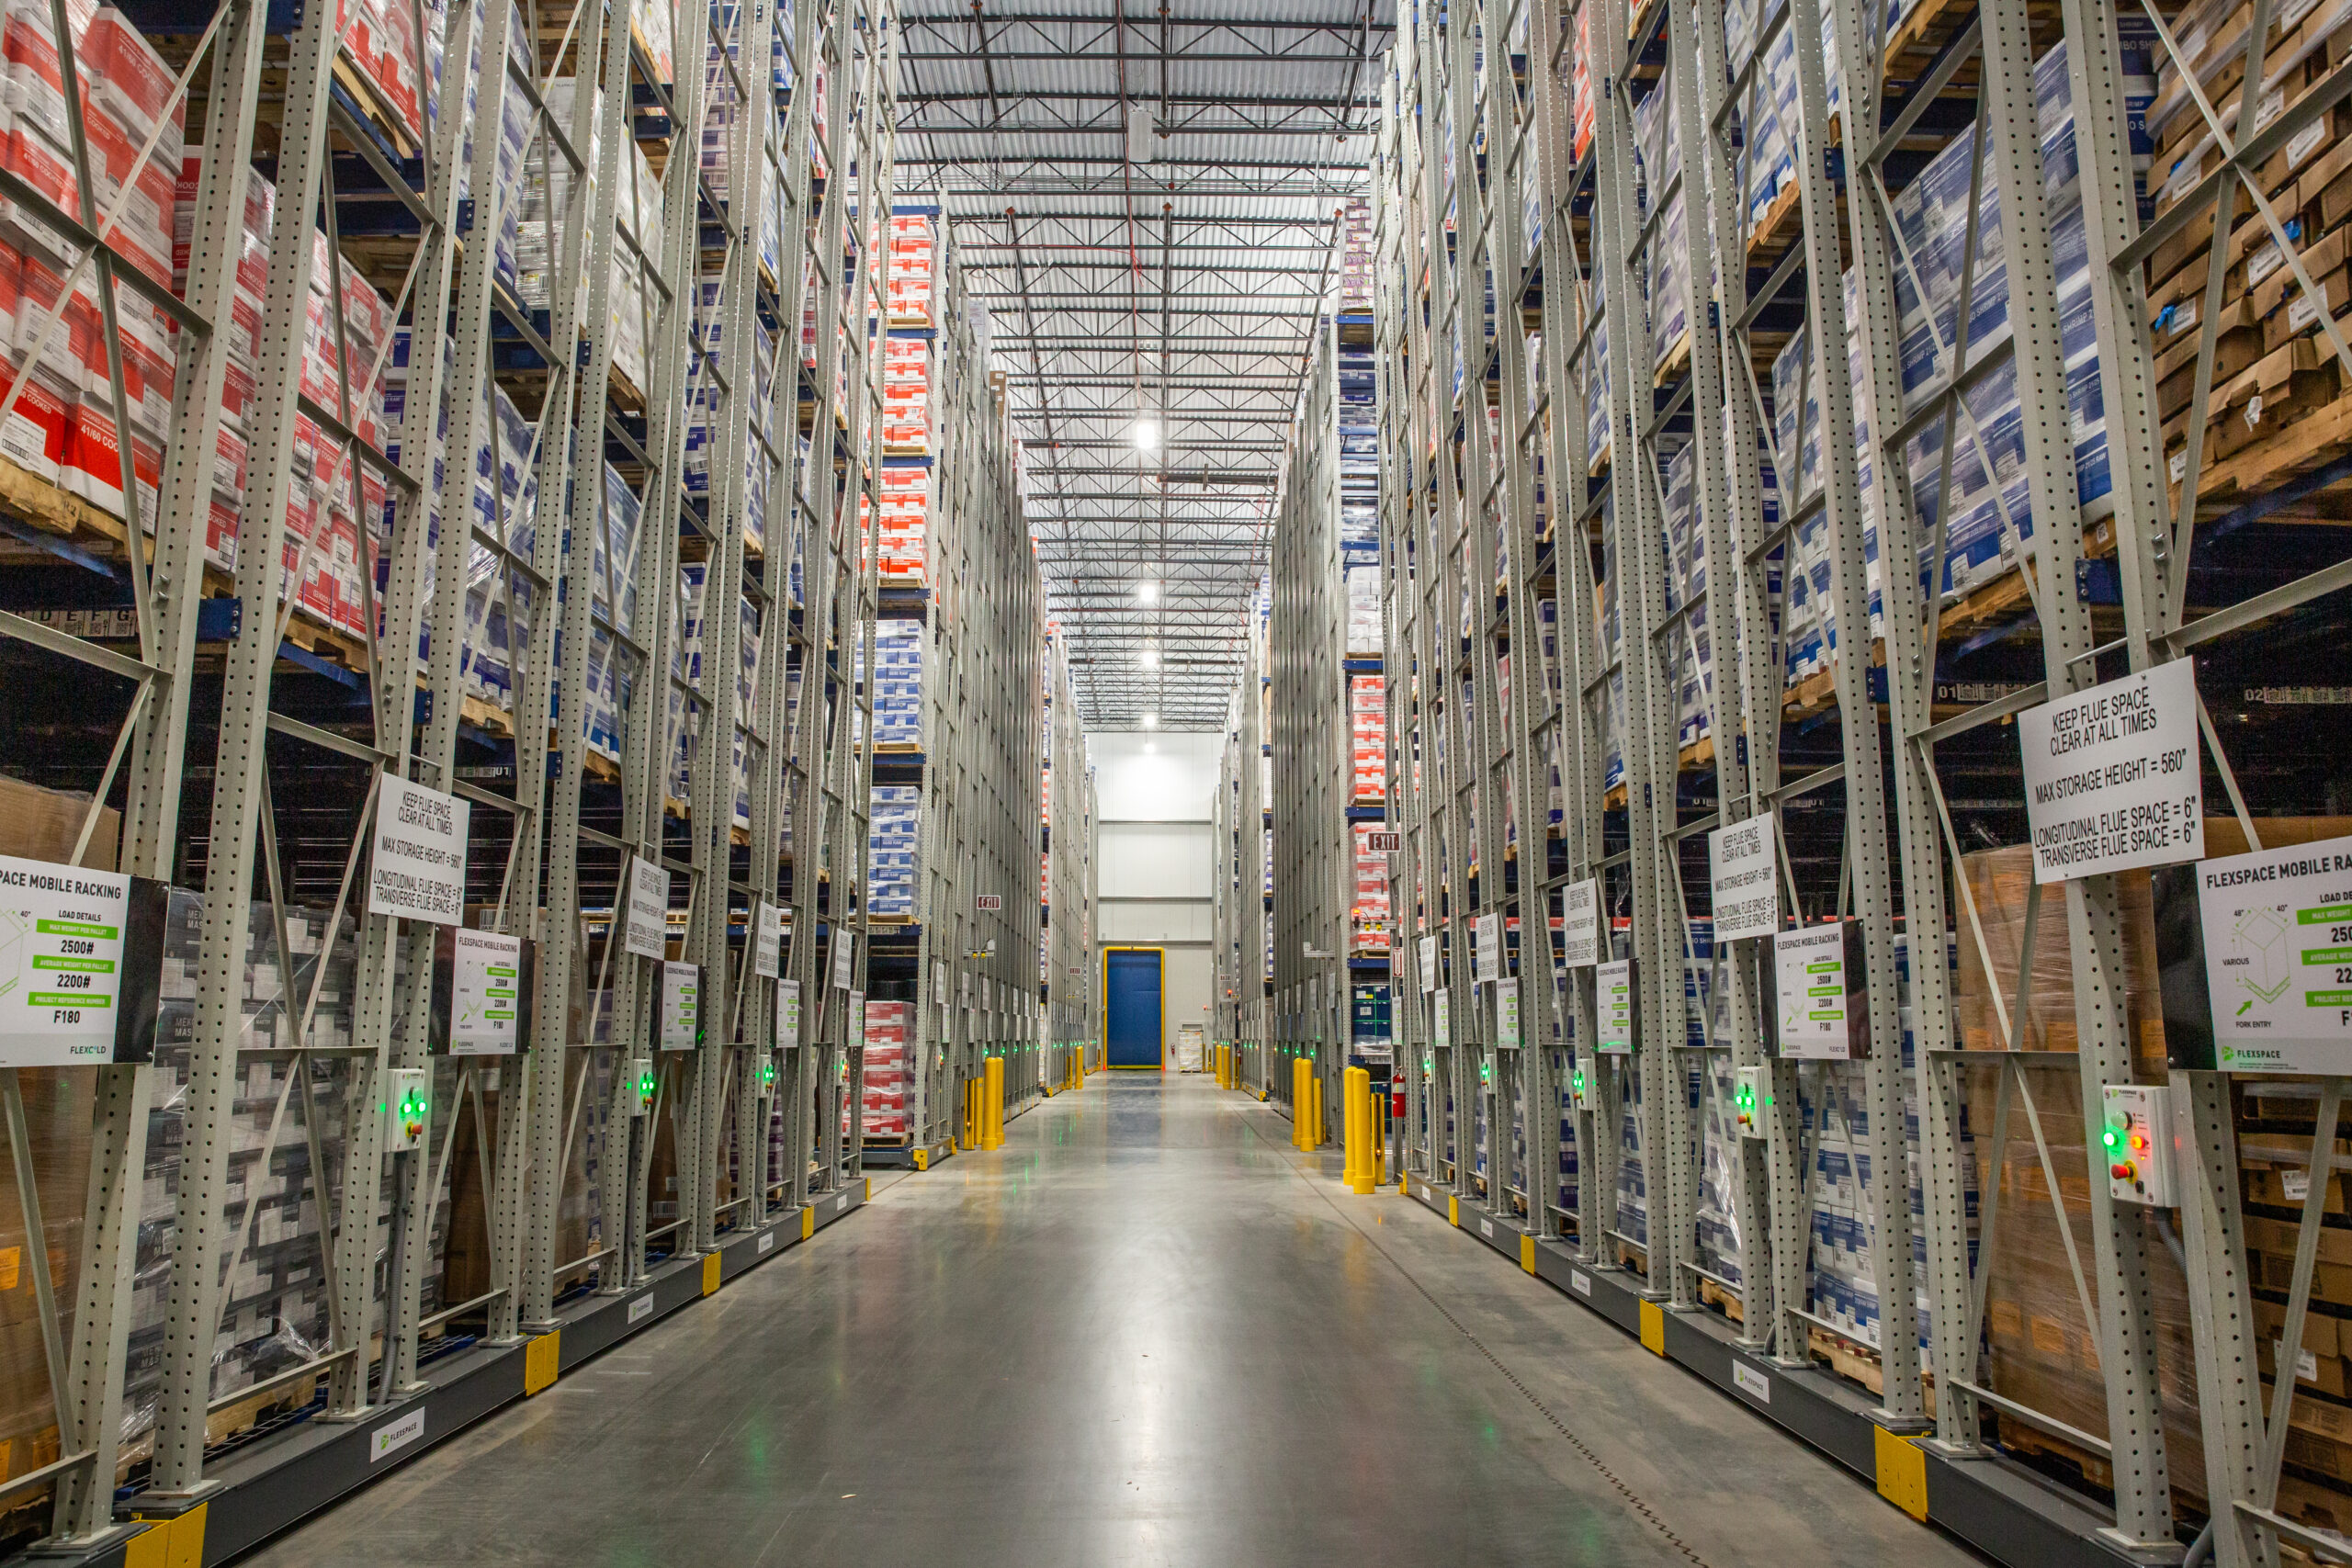 FlexCold-Jacksonville, FL pairs best-in-class-expertise across real estate, technology, and deep operational insights helping to optimize the cold storage process.